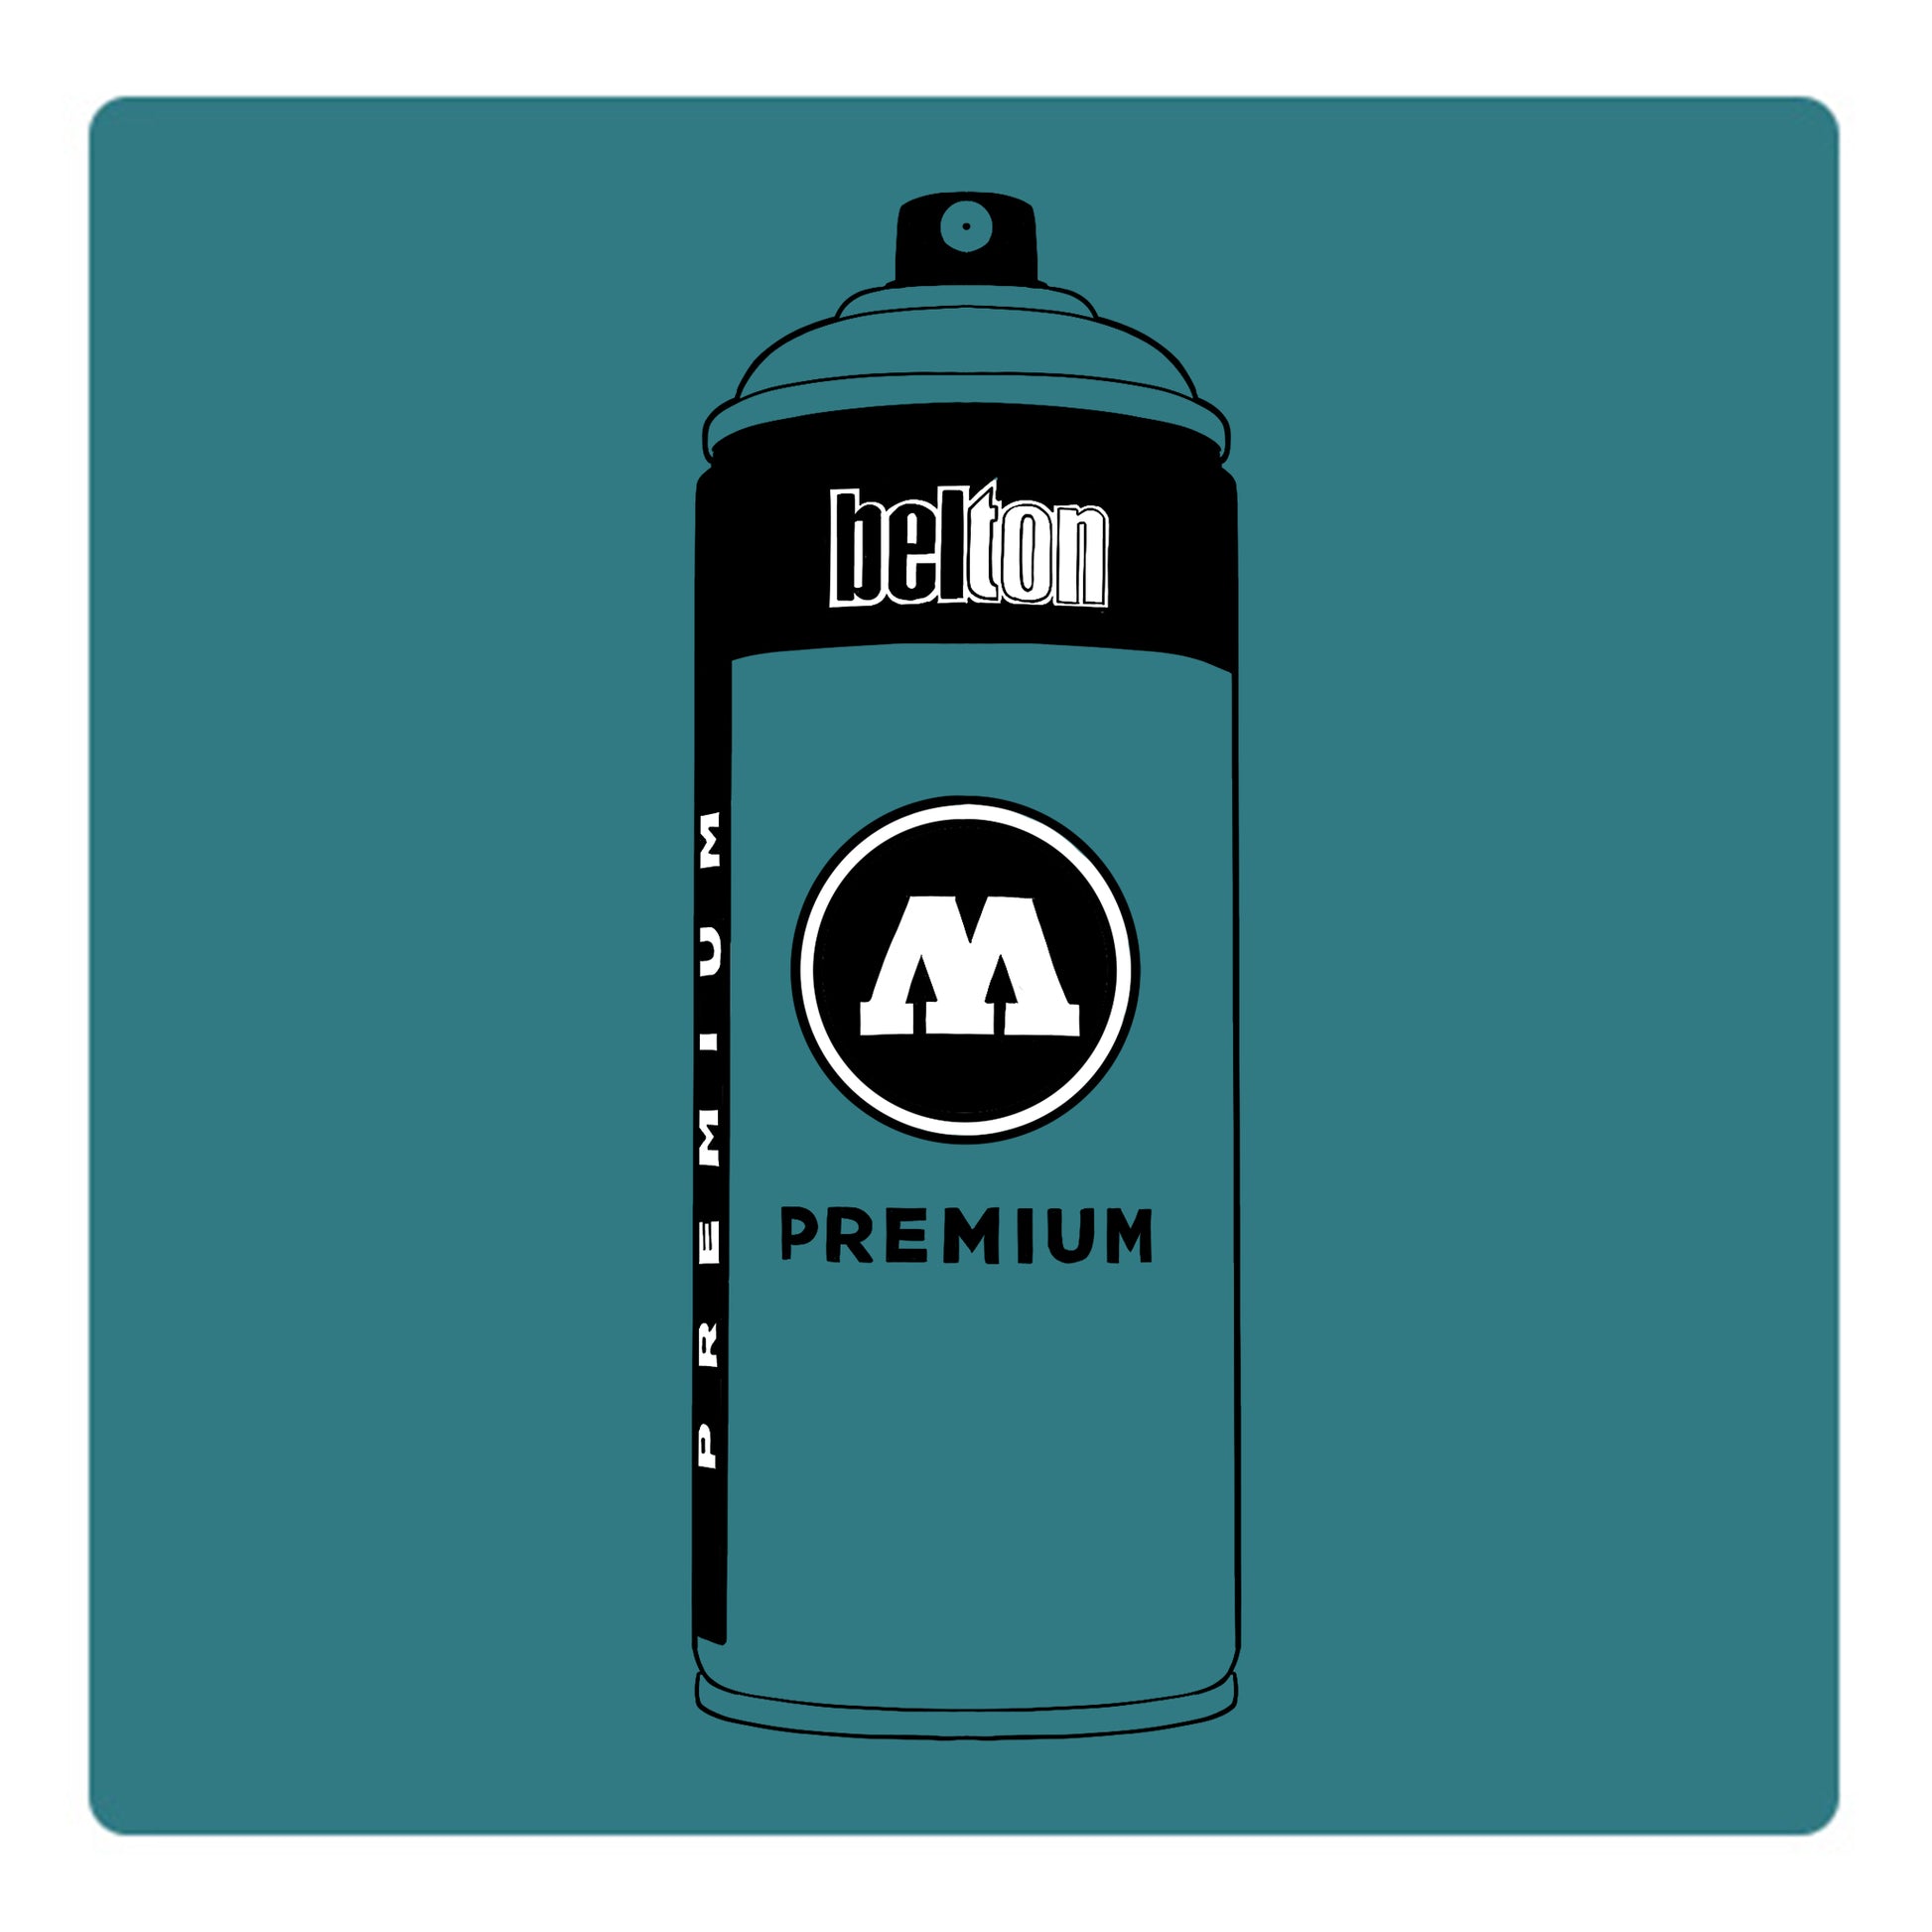 A black outline drawing of a  dark turquoise spray paint can with the words "belton","premium" and the letter"M" written on the face in black and white font. The background is a color swatch of the same Dark Turquoise with a white border.